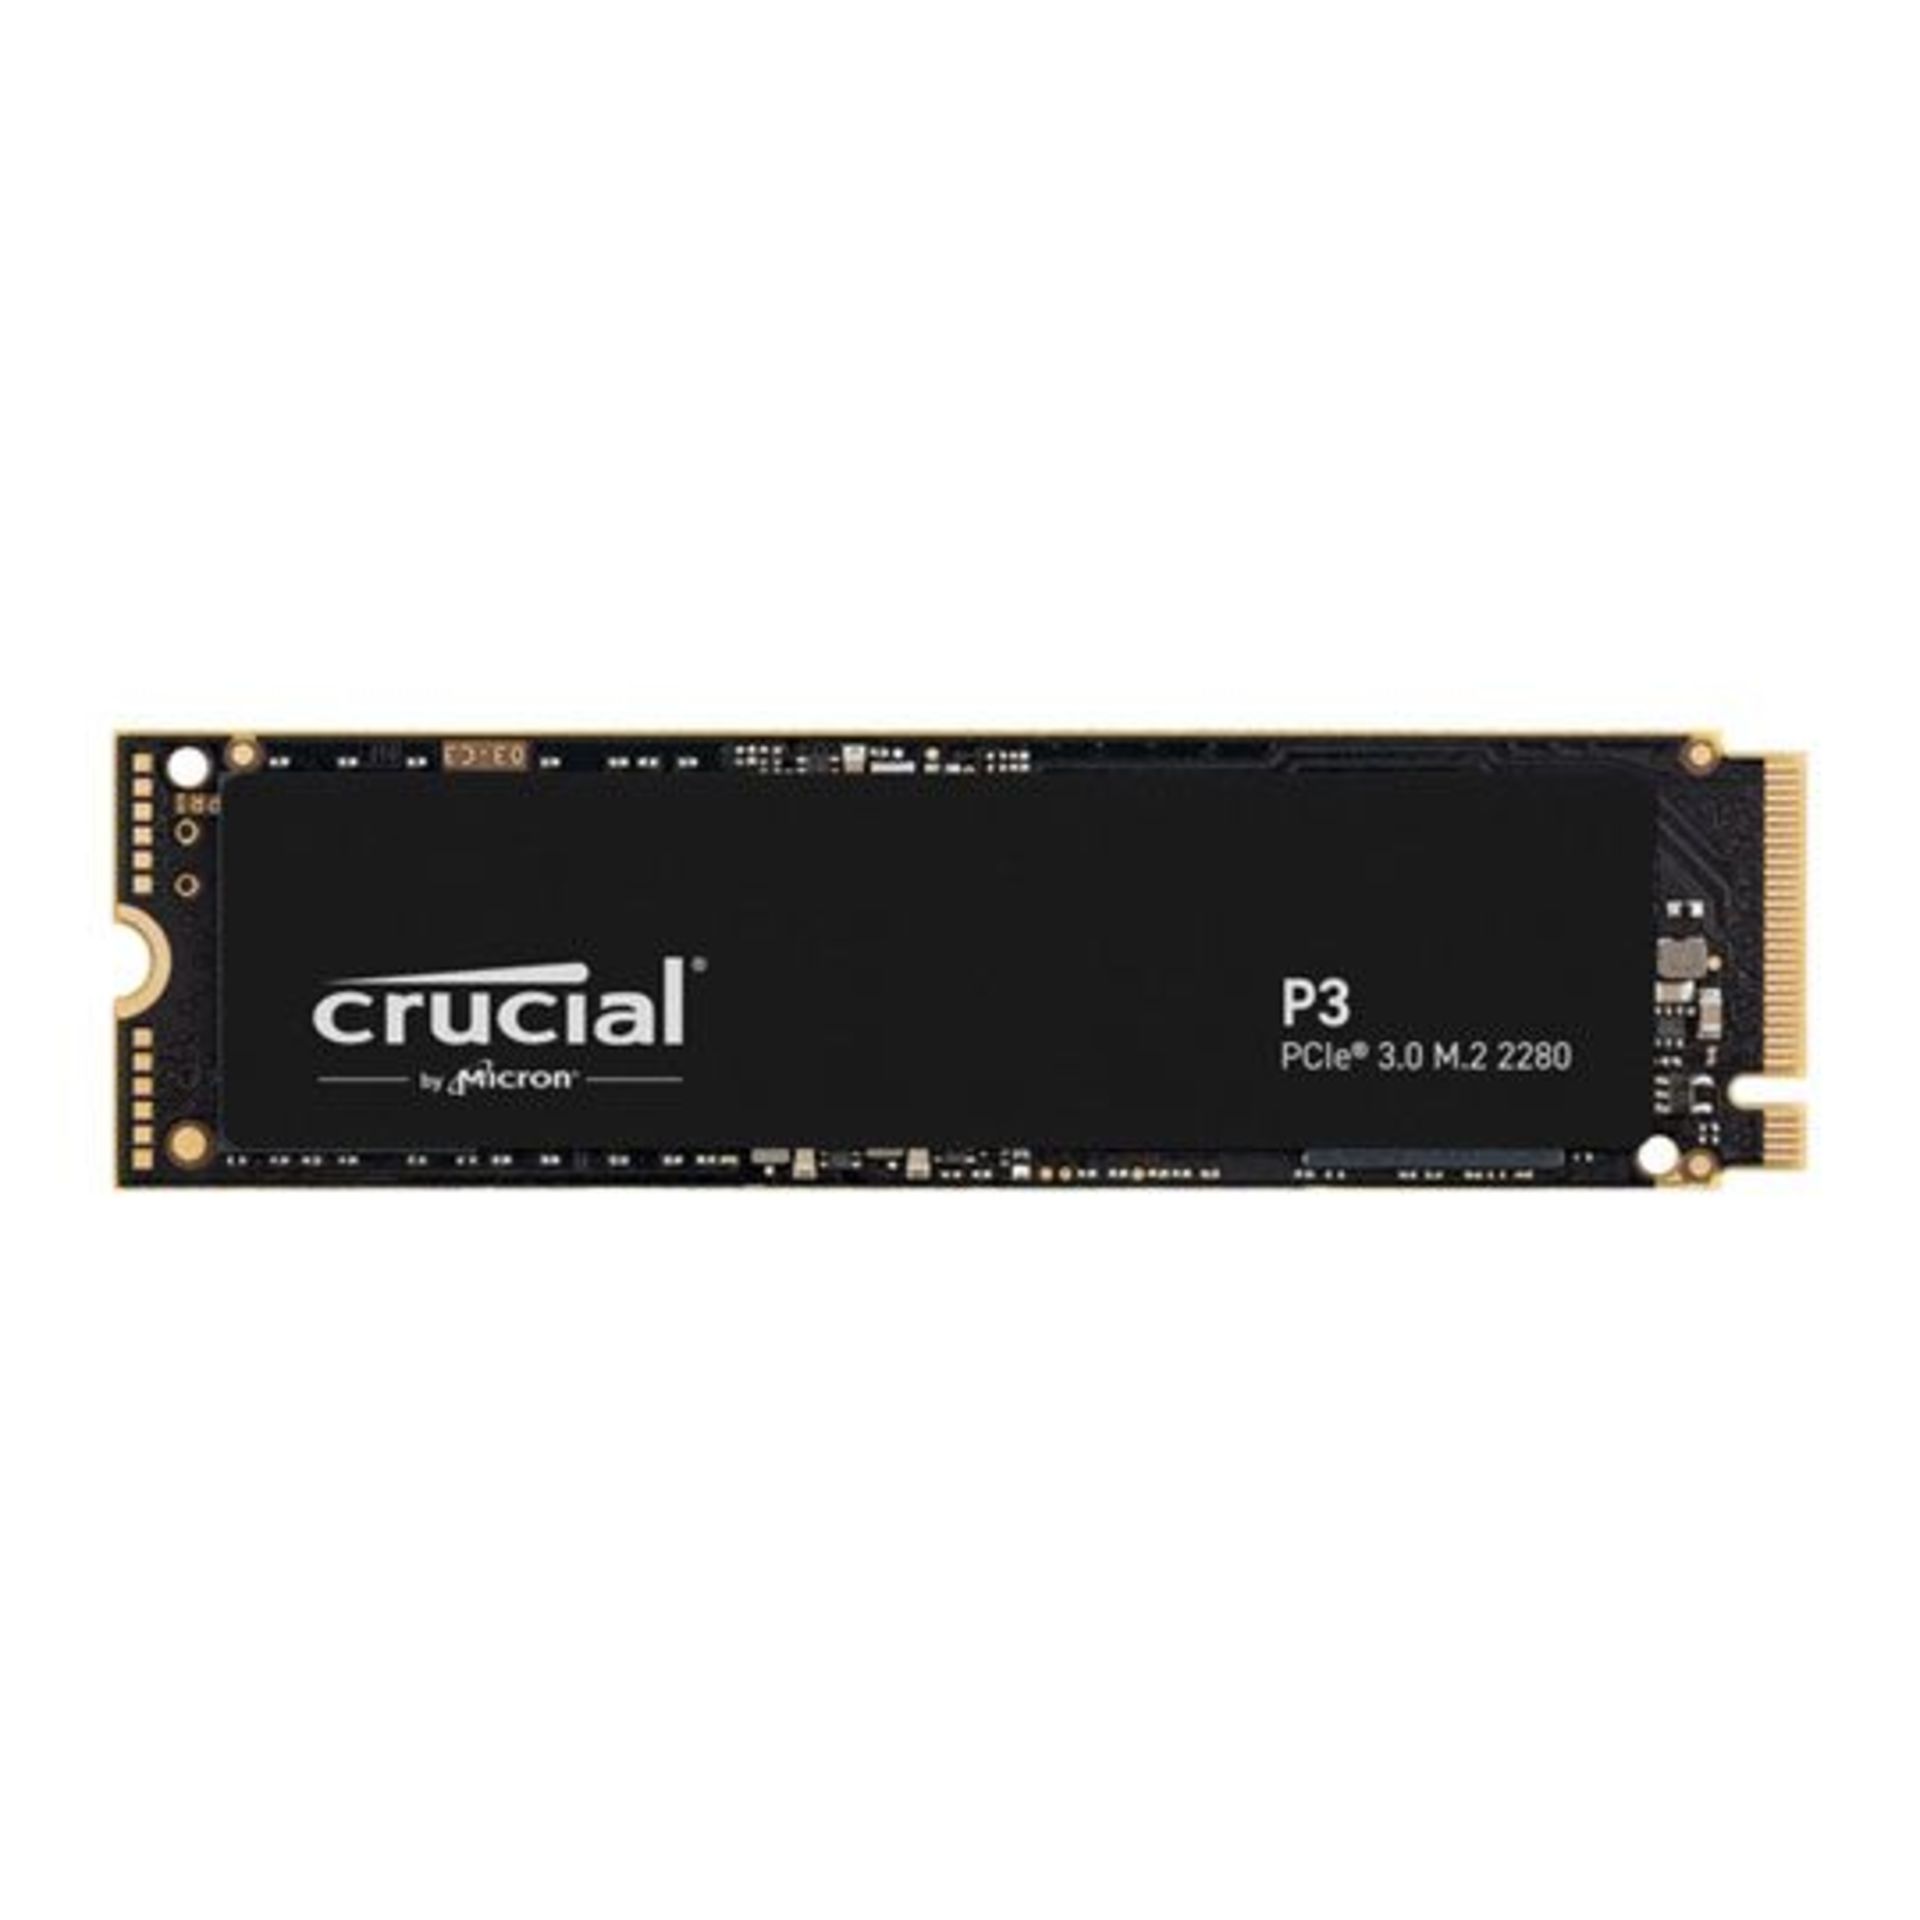 Crucial P3 500GB M.2 NVMe PCIe SSD/Solid State Drive. - P6. When at work, on-the-go or in game,